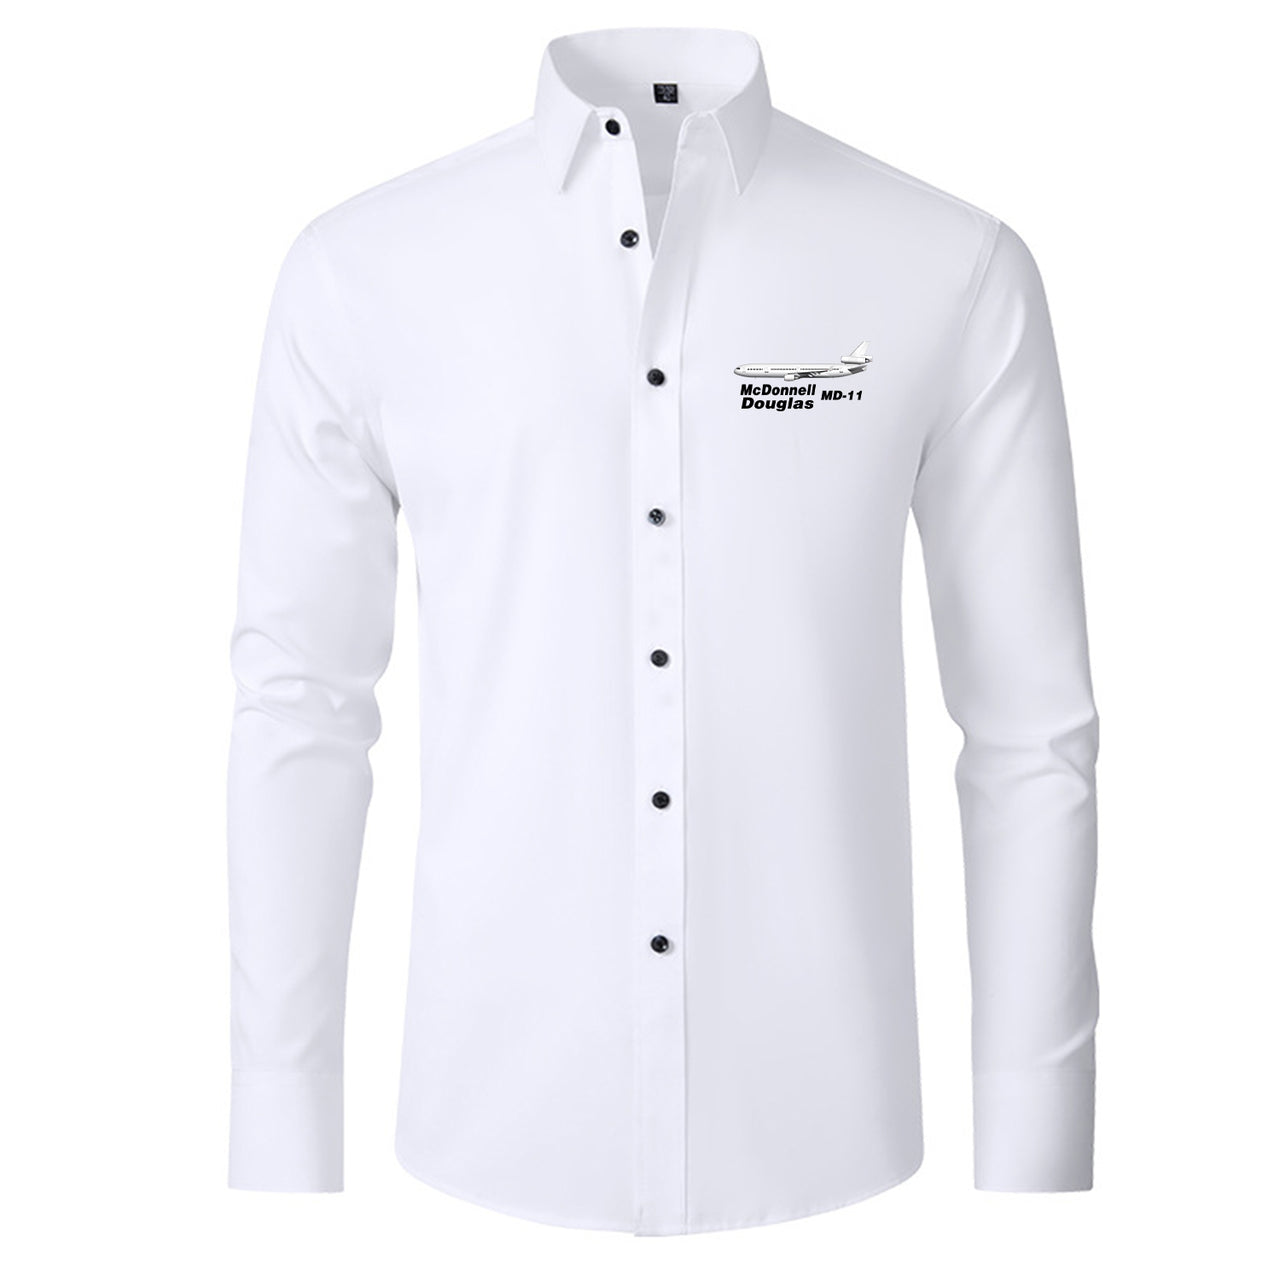 The McDonnell Douglas MD-11 Designed Long Sleeve Shirts